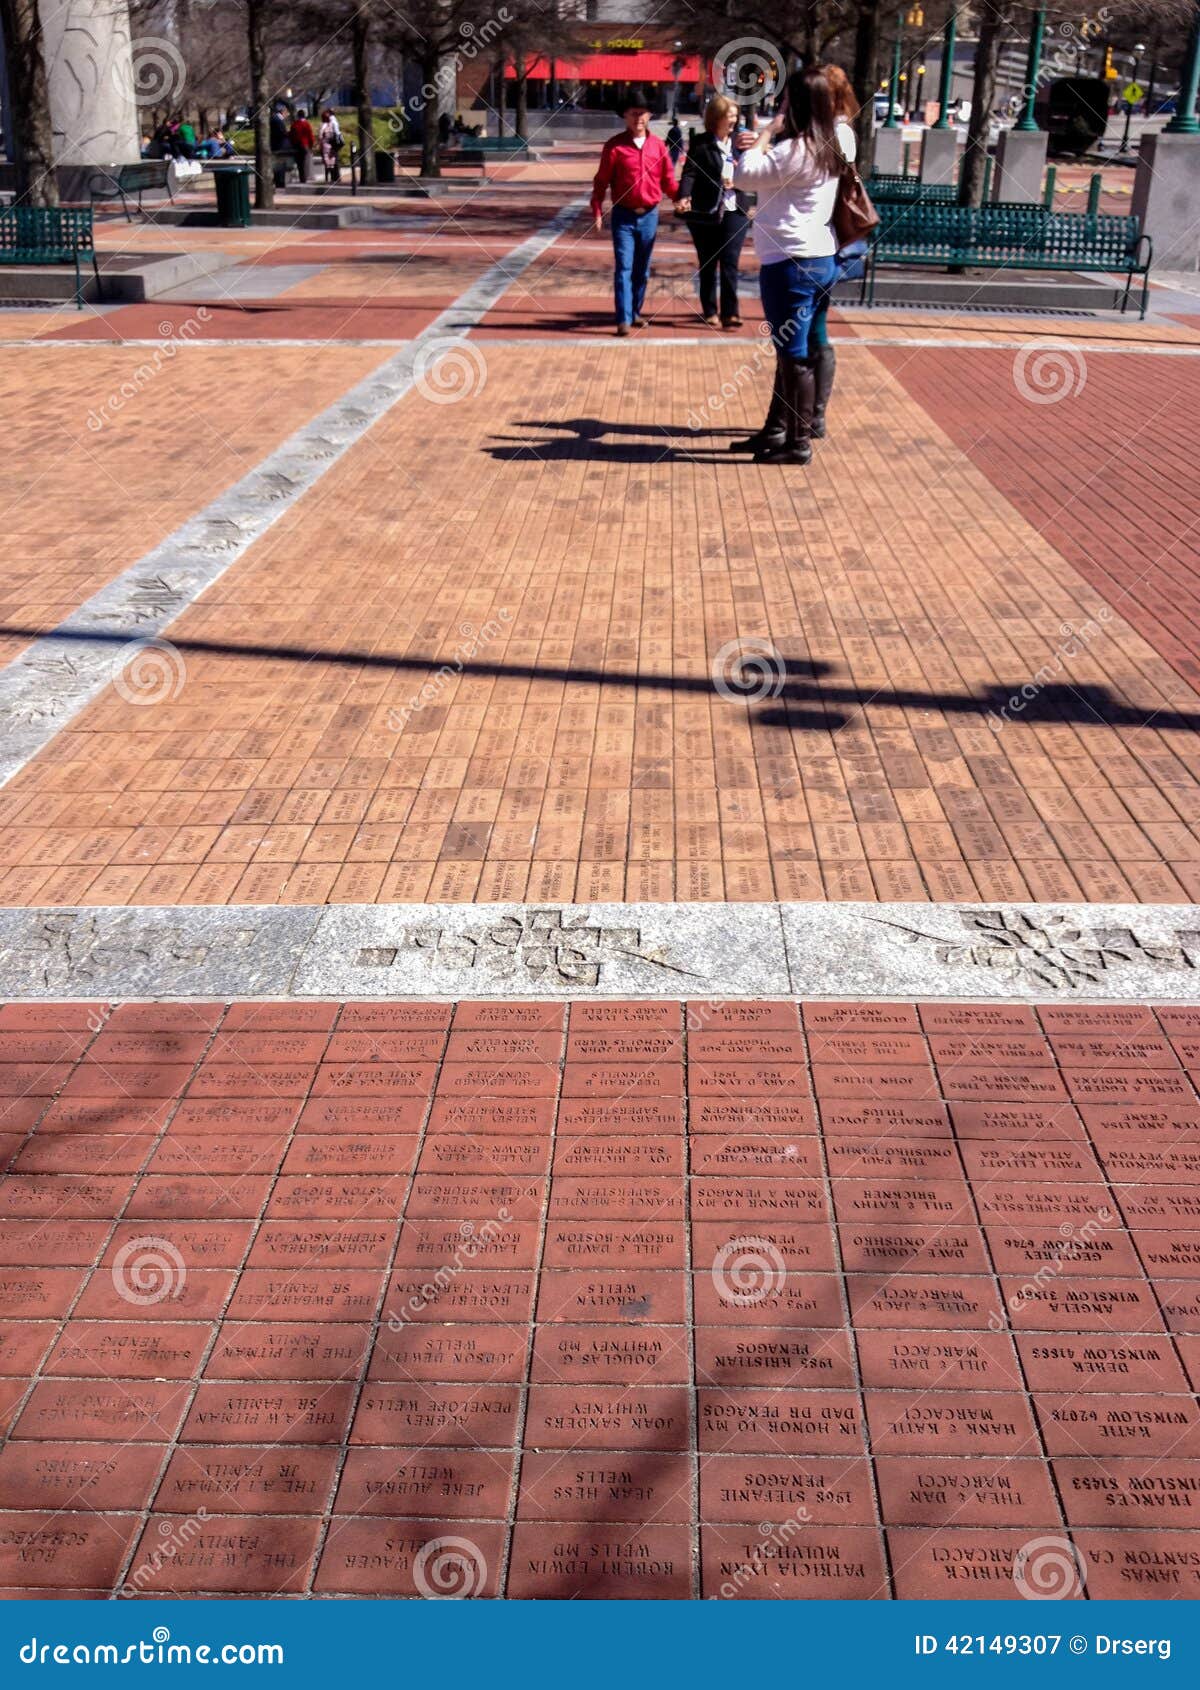 Top 99+ Images how to find your brick at centennial olympic park Full HD, 2k, 4k